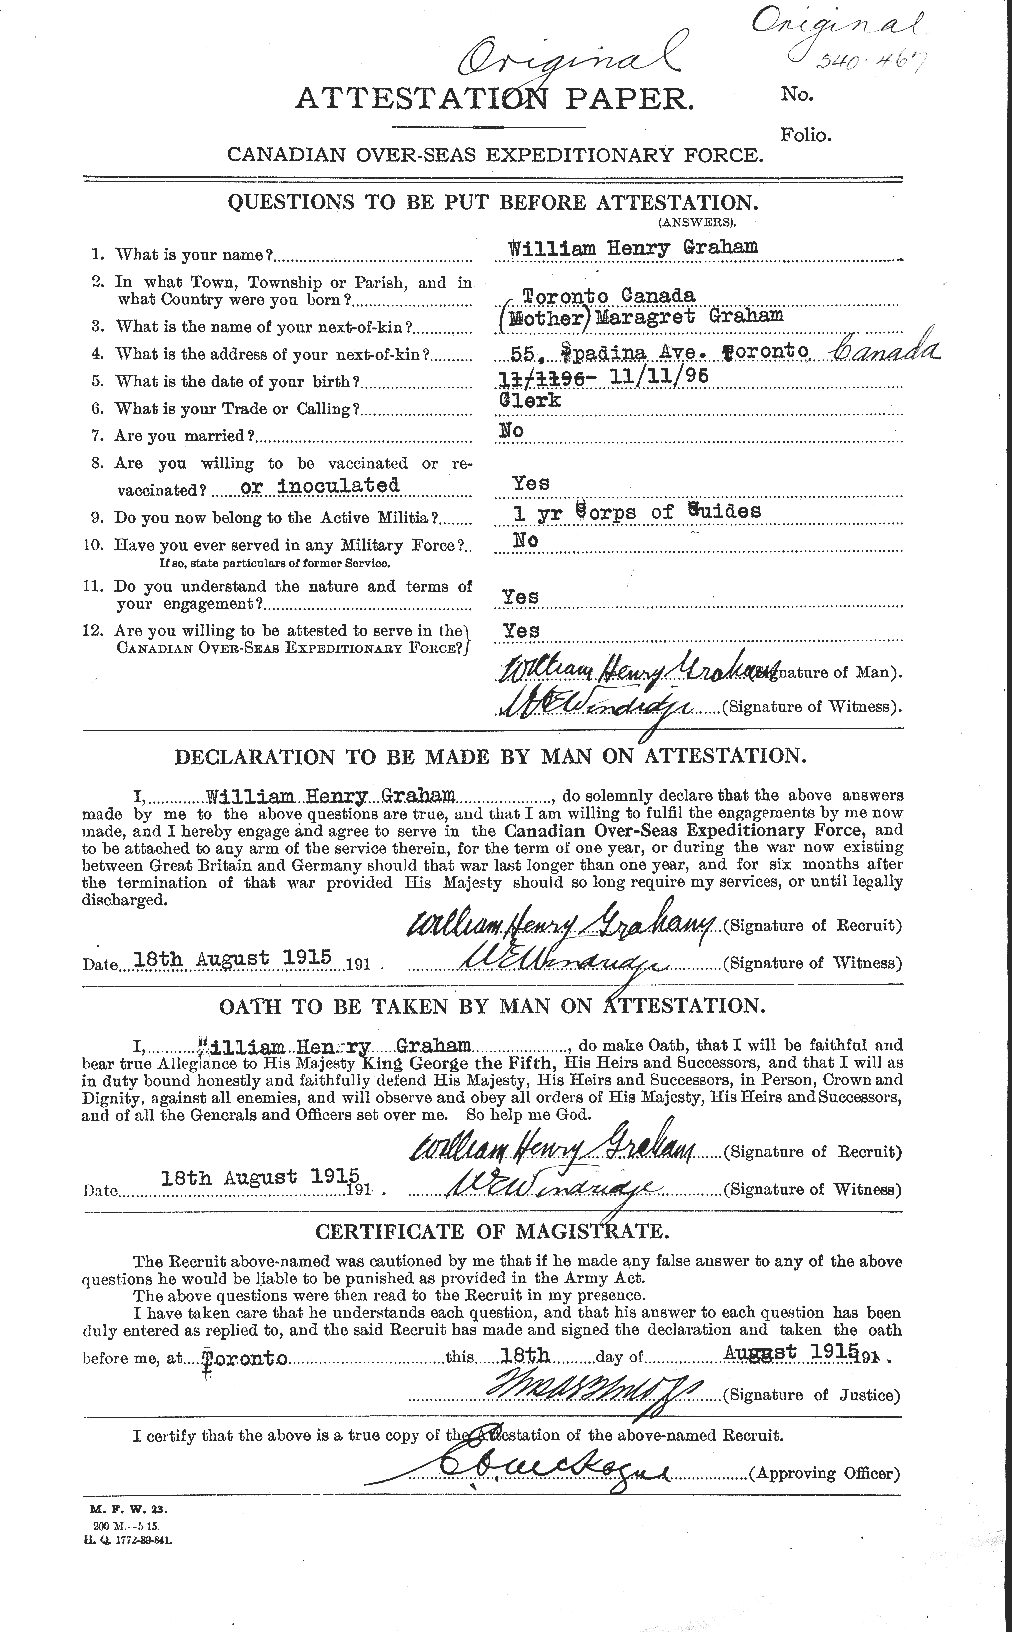 Personnel Records of the First World War - CEF 358005a